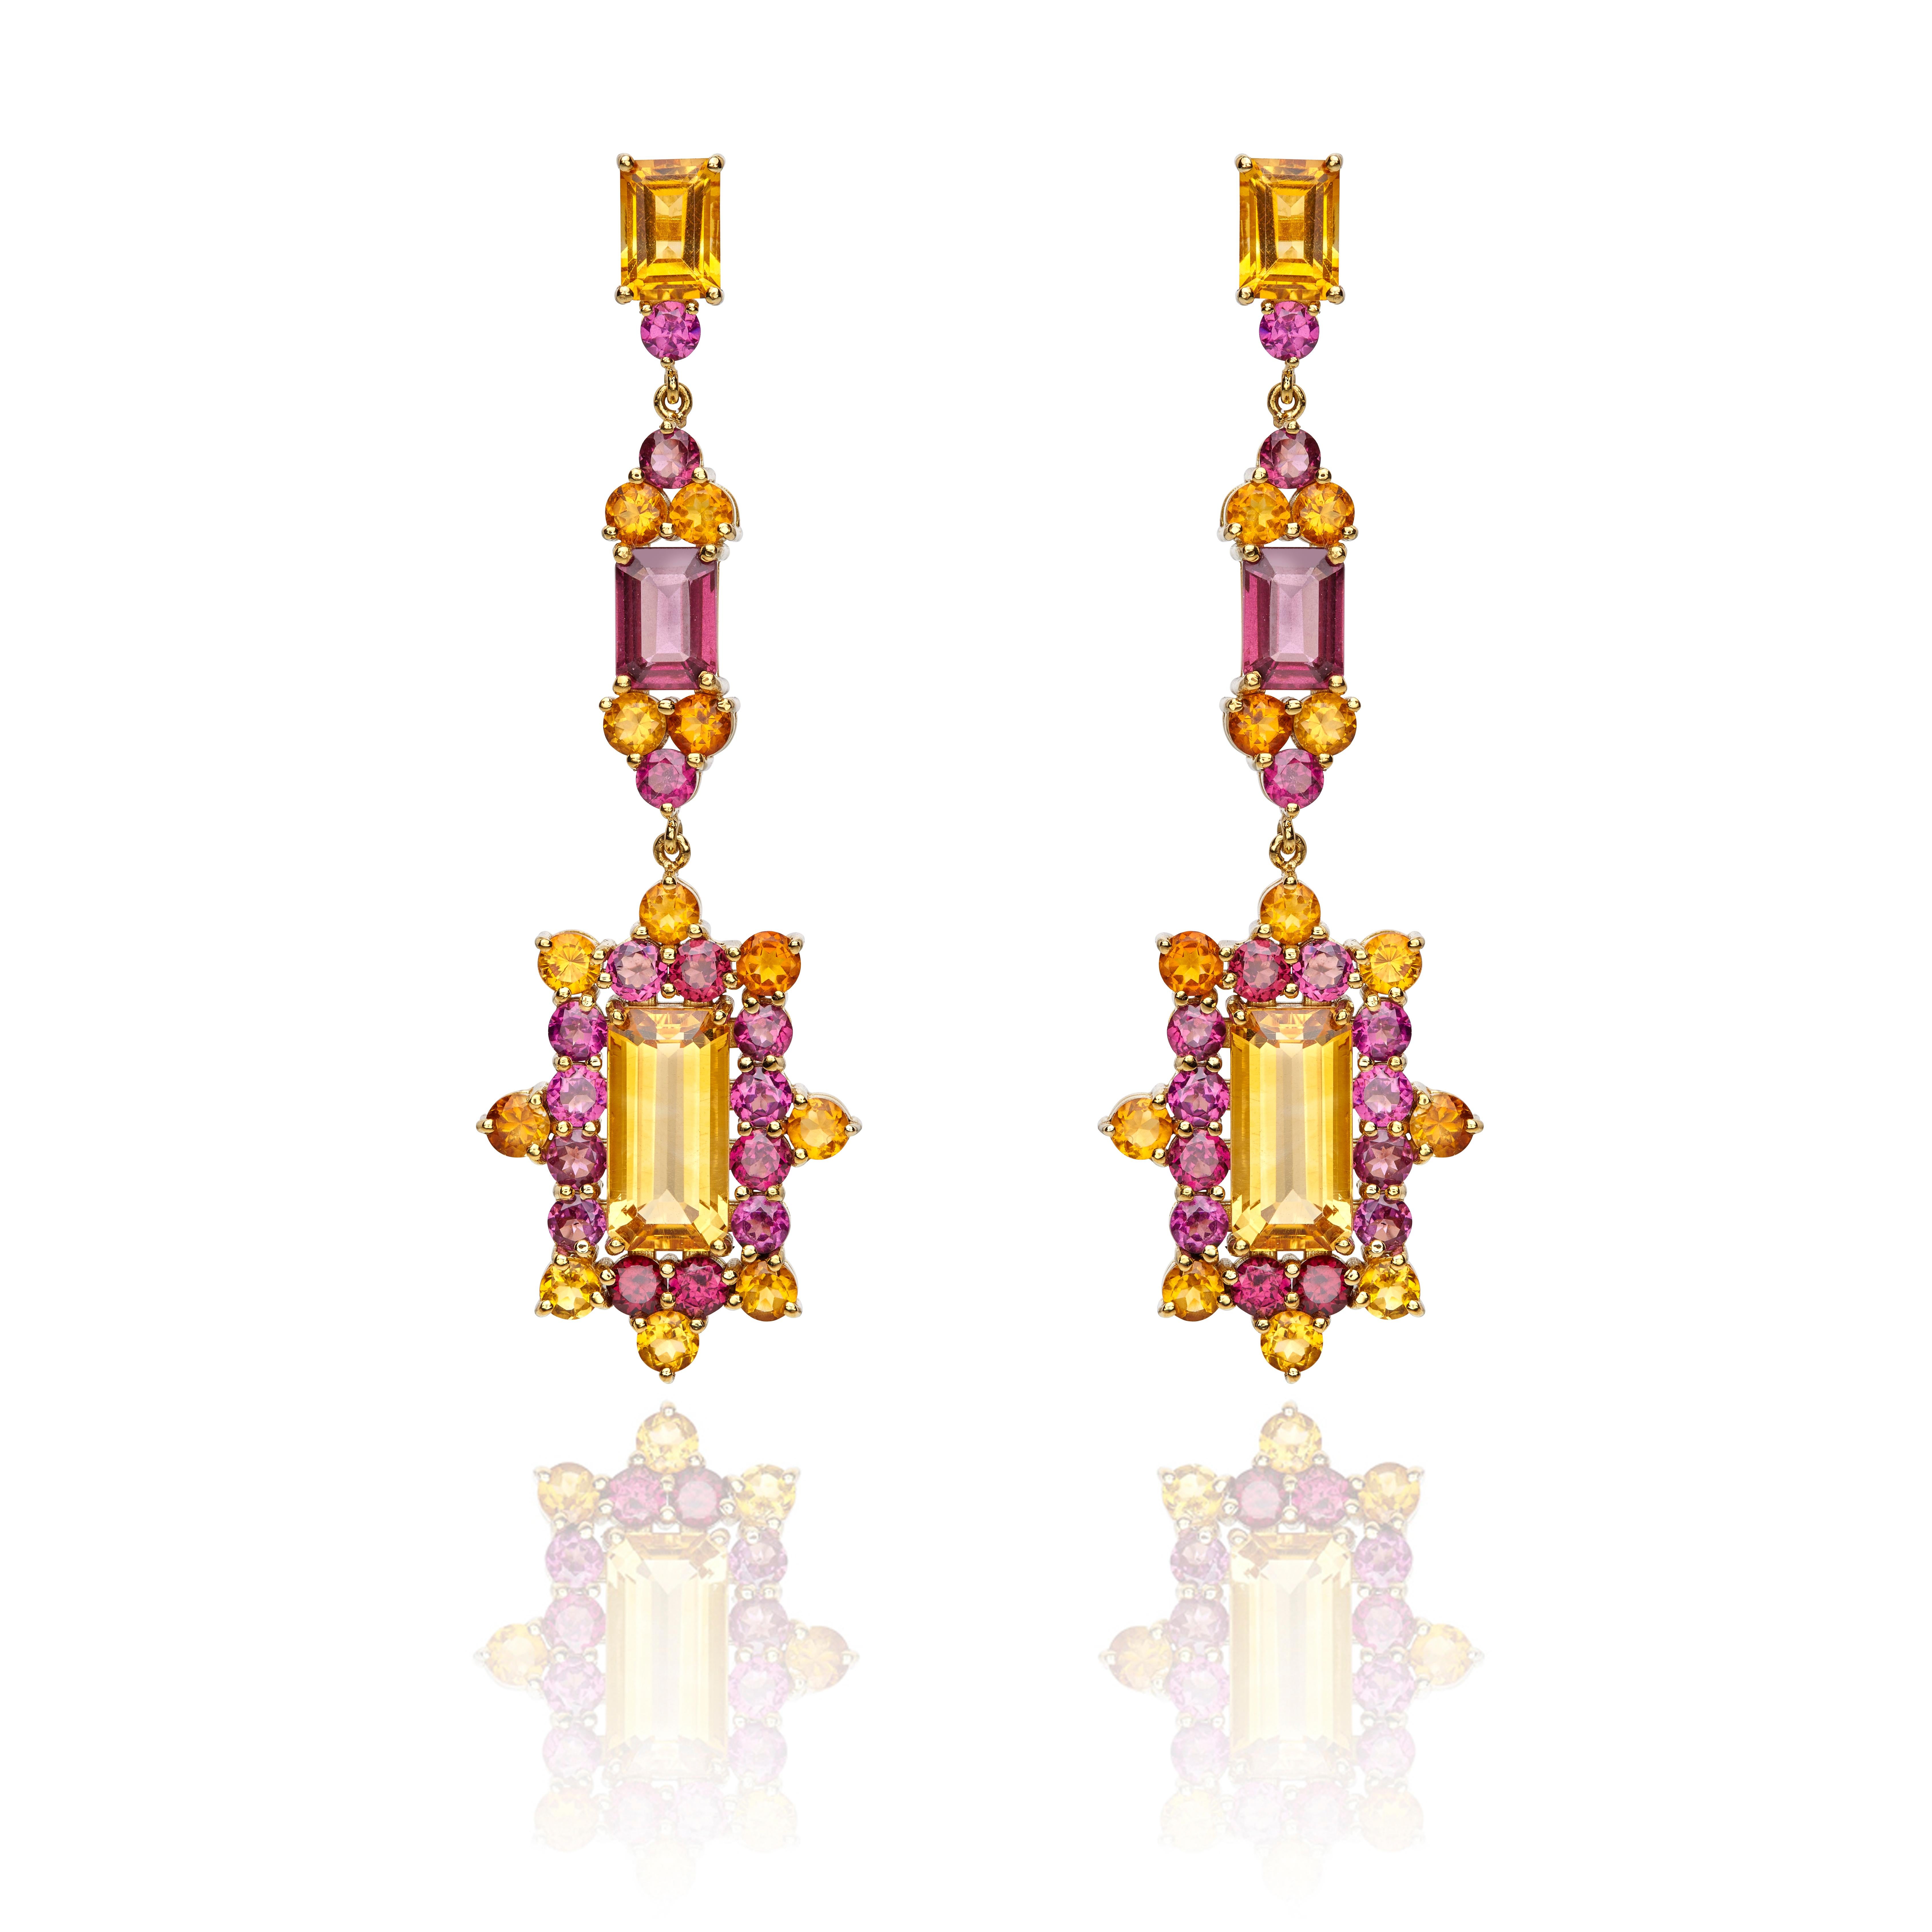 Long Dange Earrings, Chandelier style in 18k carat Yellow Gold with Red Rhodolite and orange Citrine
The 